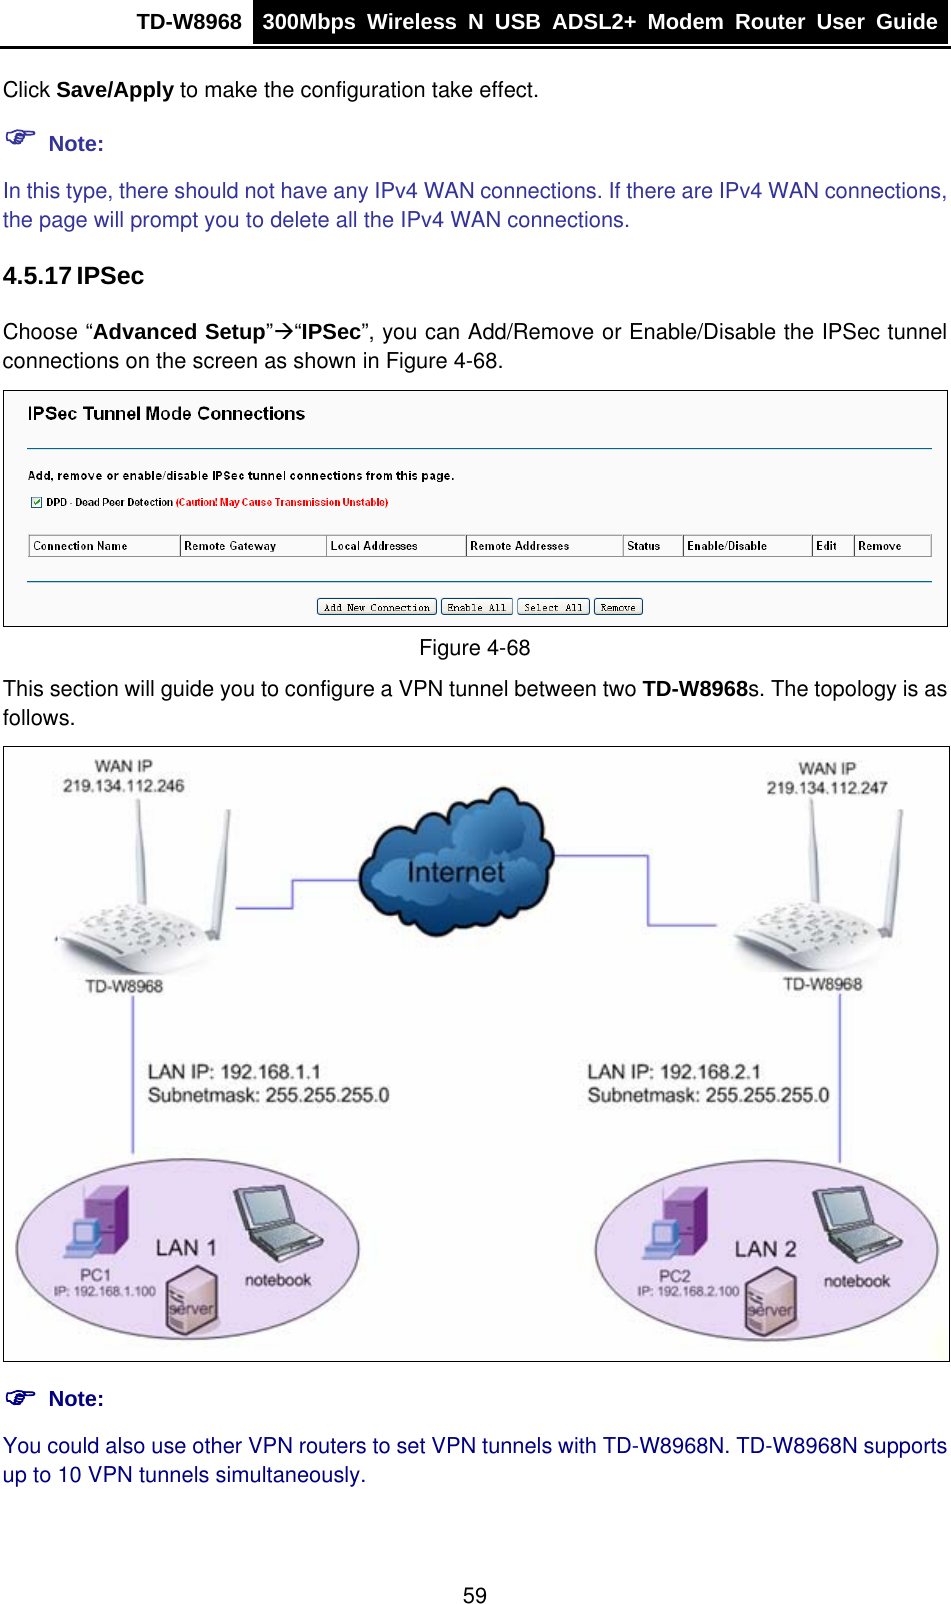 TD-W8968  300Mbps Wireless N USB ADSL2+ Modem Router User Guide  Click Save/Apply to make the configuration take effect. ) Note: In this type, there should not have any IPv4 WAN connections. If there are IPv4 WAN connections, the page will prompt you to delete all the IPv4 WAN connections. 4.5.17 IPSec Choose “Advanced Setup”Æ“IPSec”, you can Add/Remove or Enable/Disable the IPSec tunnel connections on the screen as shown in Figure 4-68.   Figure 4-68 This section will guide you to configure a VPN tunnel between two TD-W8968s. The topology is as follows.  ) Note: You could also use other VPN routers to set VPN tunnels with TD-W8968N. TD-W8968N supports up to 10 VPN tunnels simultaneously. 59 